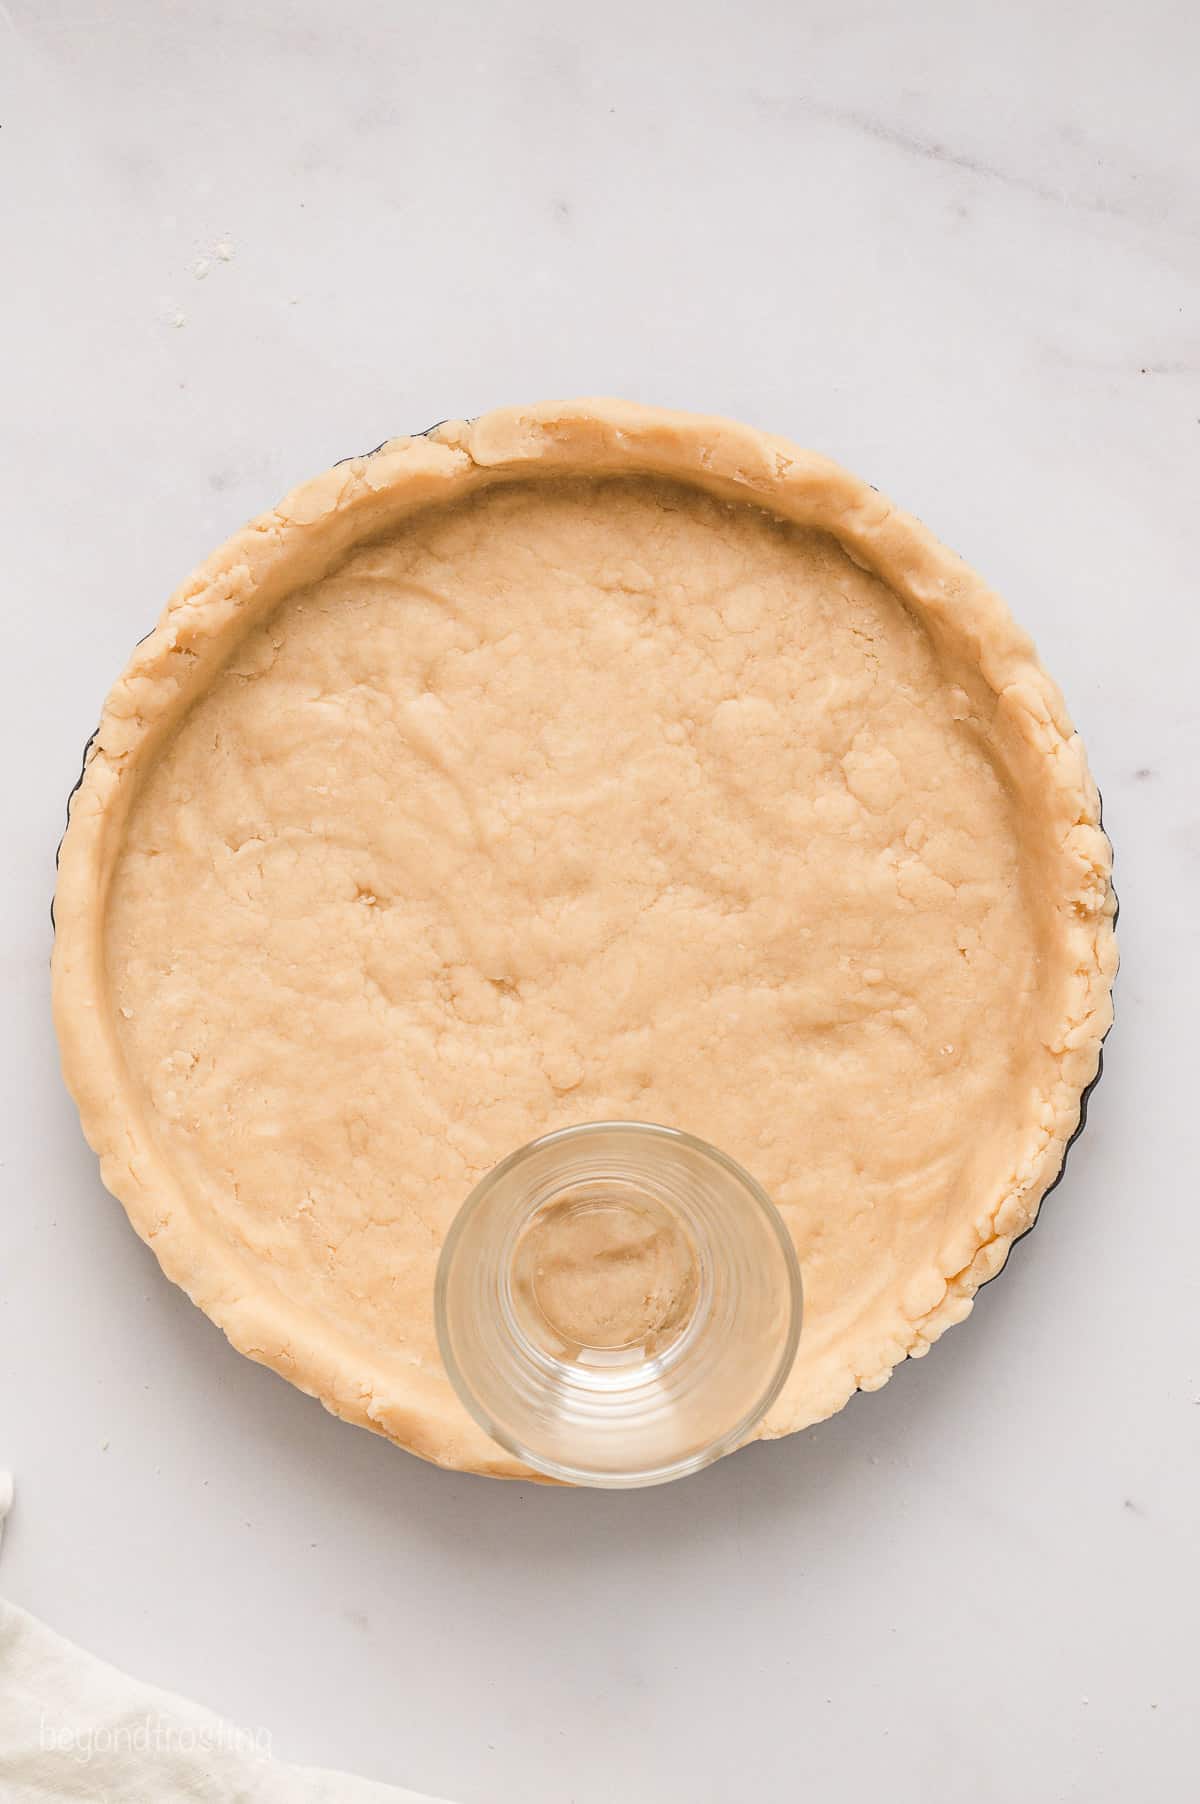 The bottom of a glass is used to press the pastry crust mixture into a pie plate.